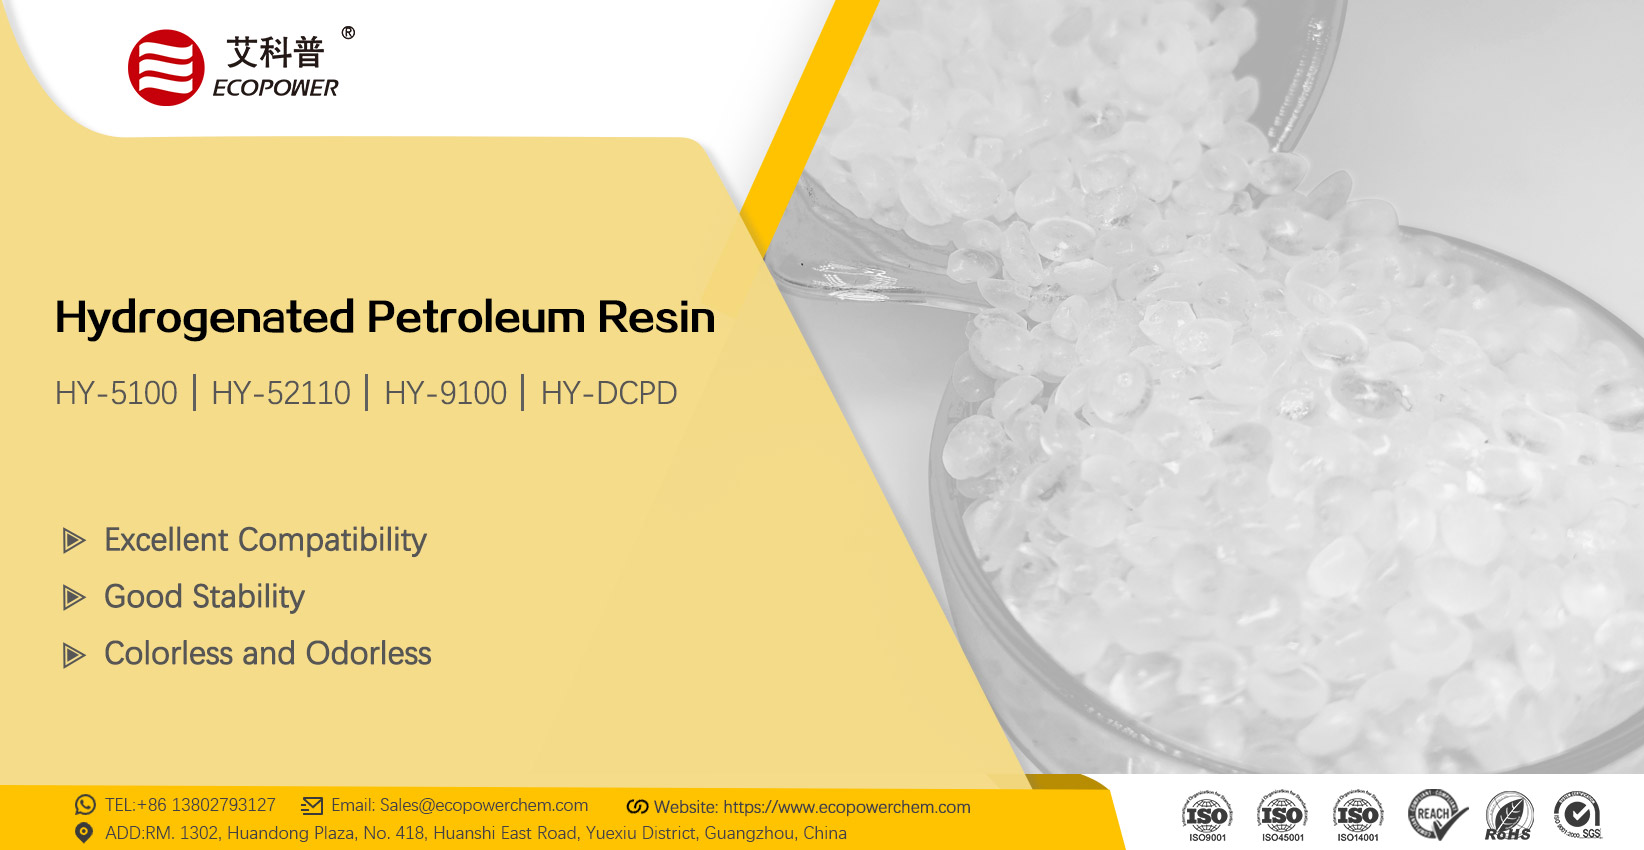 Properties and Applications of Hydrogenated Petroleum Resin